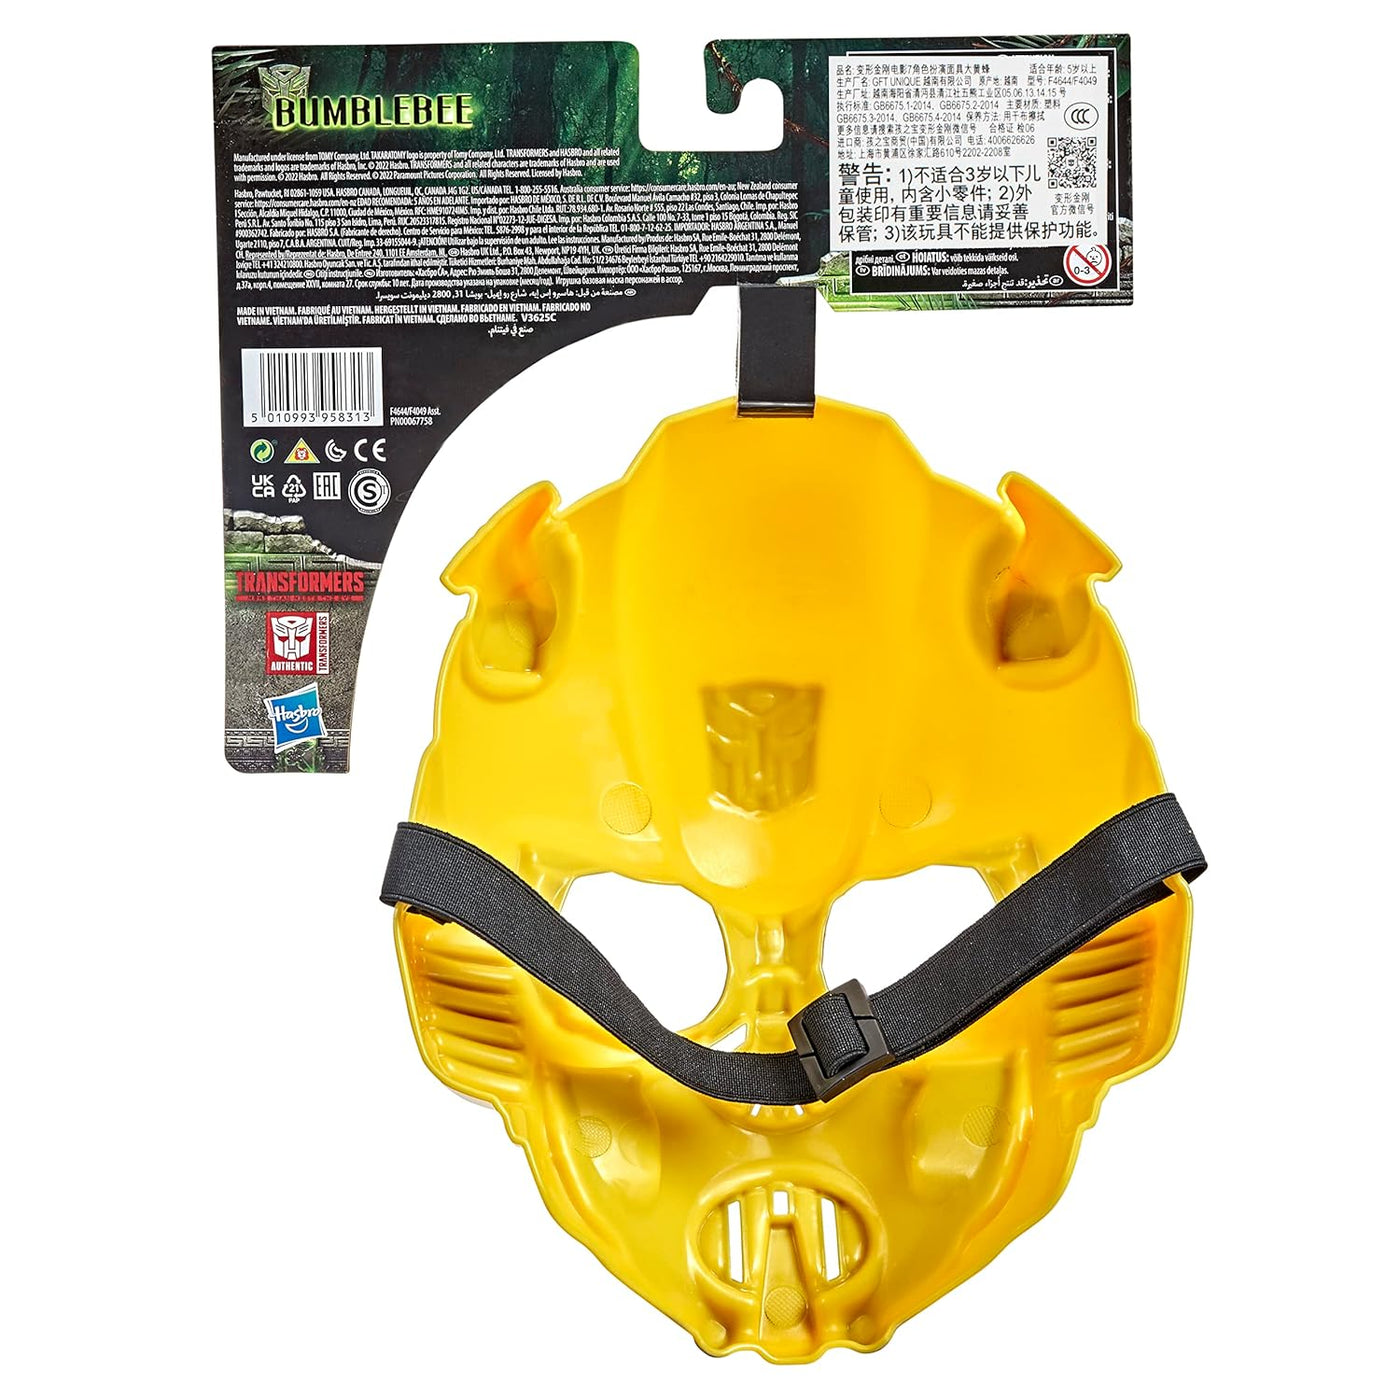 Transformers Rise of The Beasts Mask: Bumblebee | Hasbro